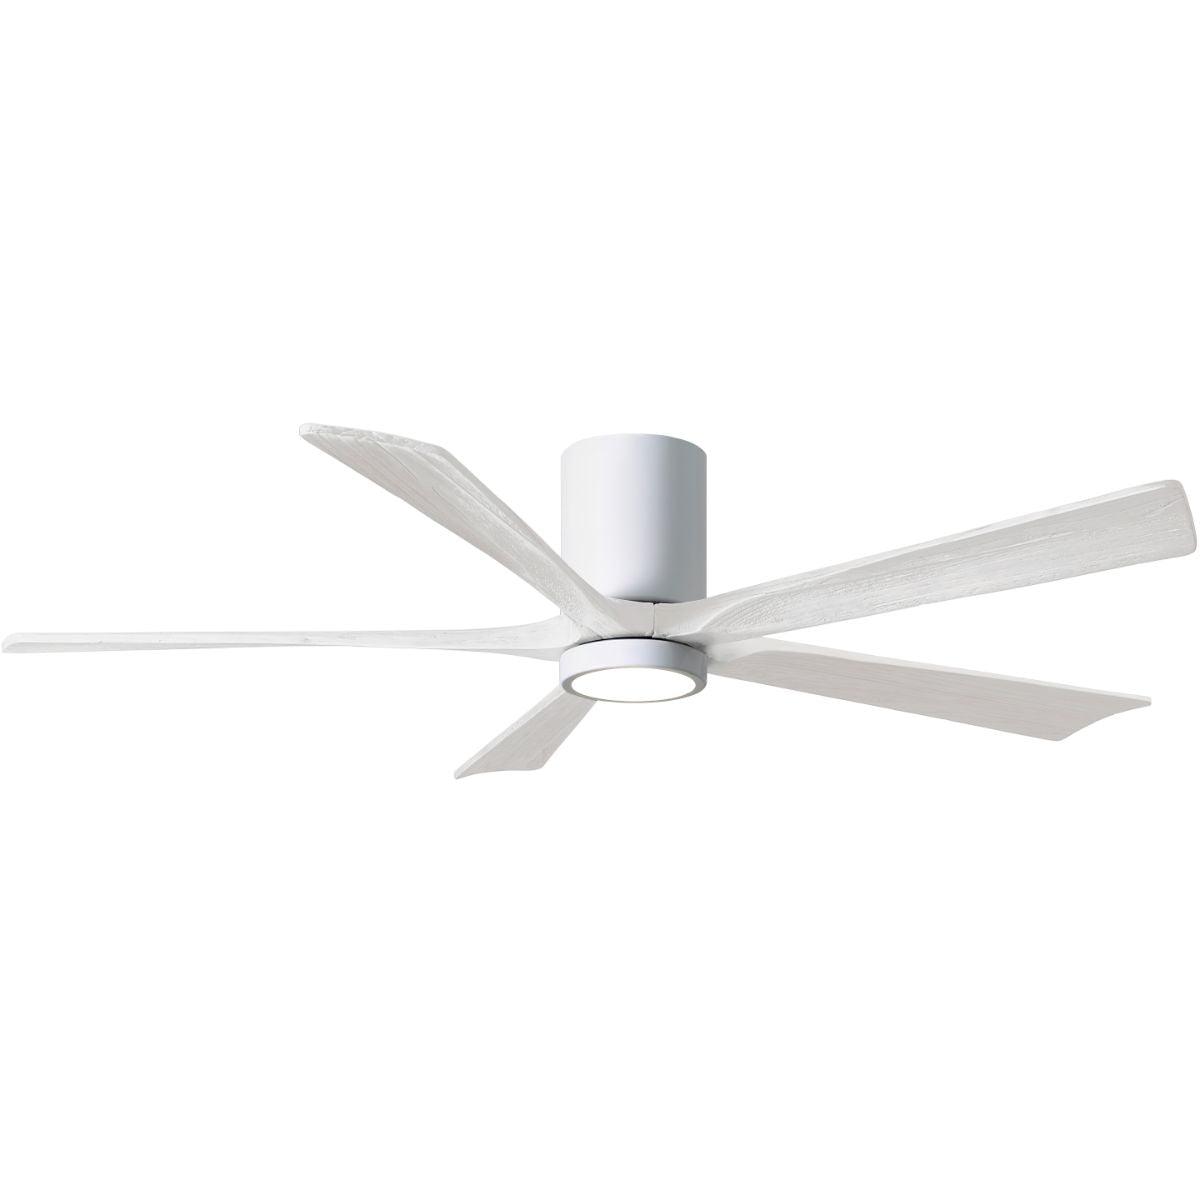 Irene 60 Inch Modern Outdoor Ceiling Fan With Light, Wall And Remote Control Included